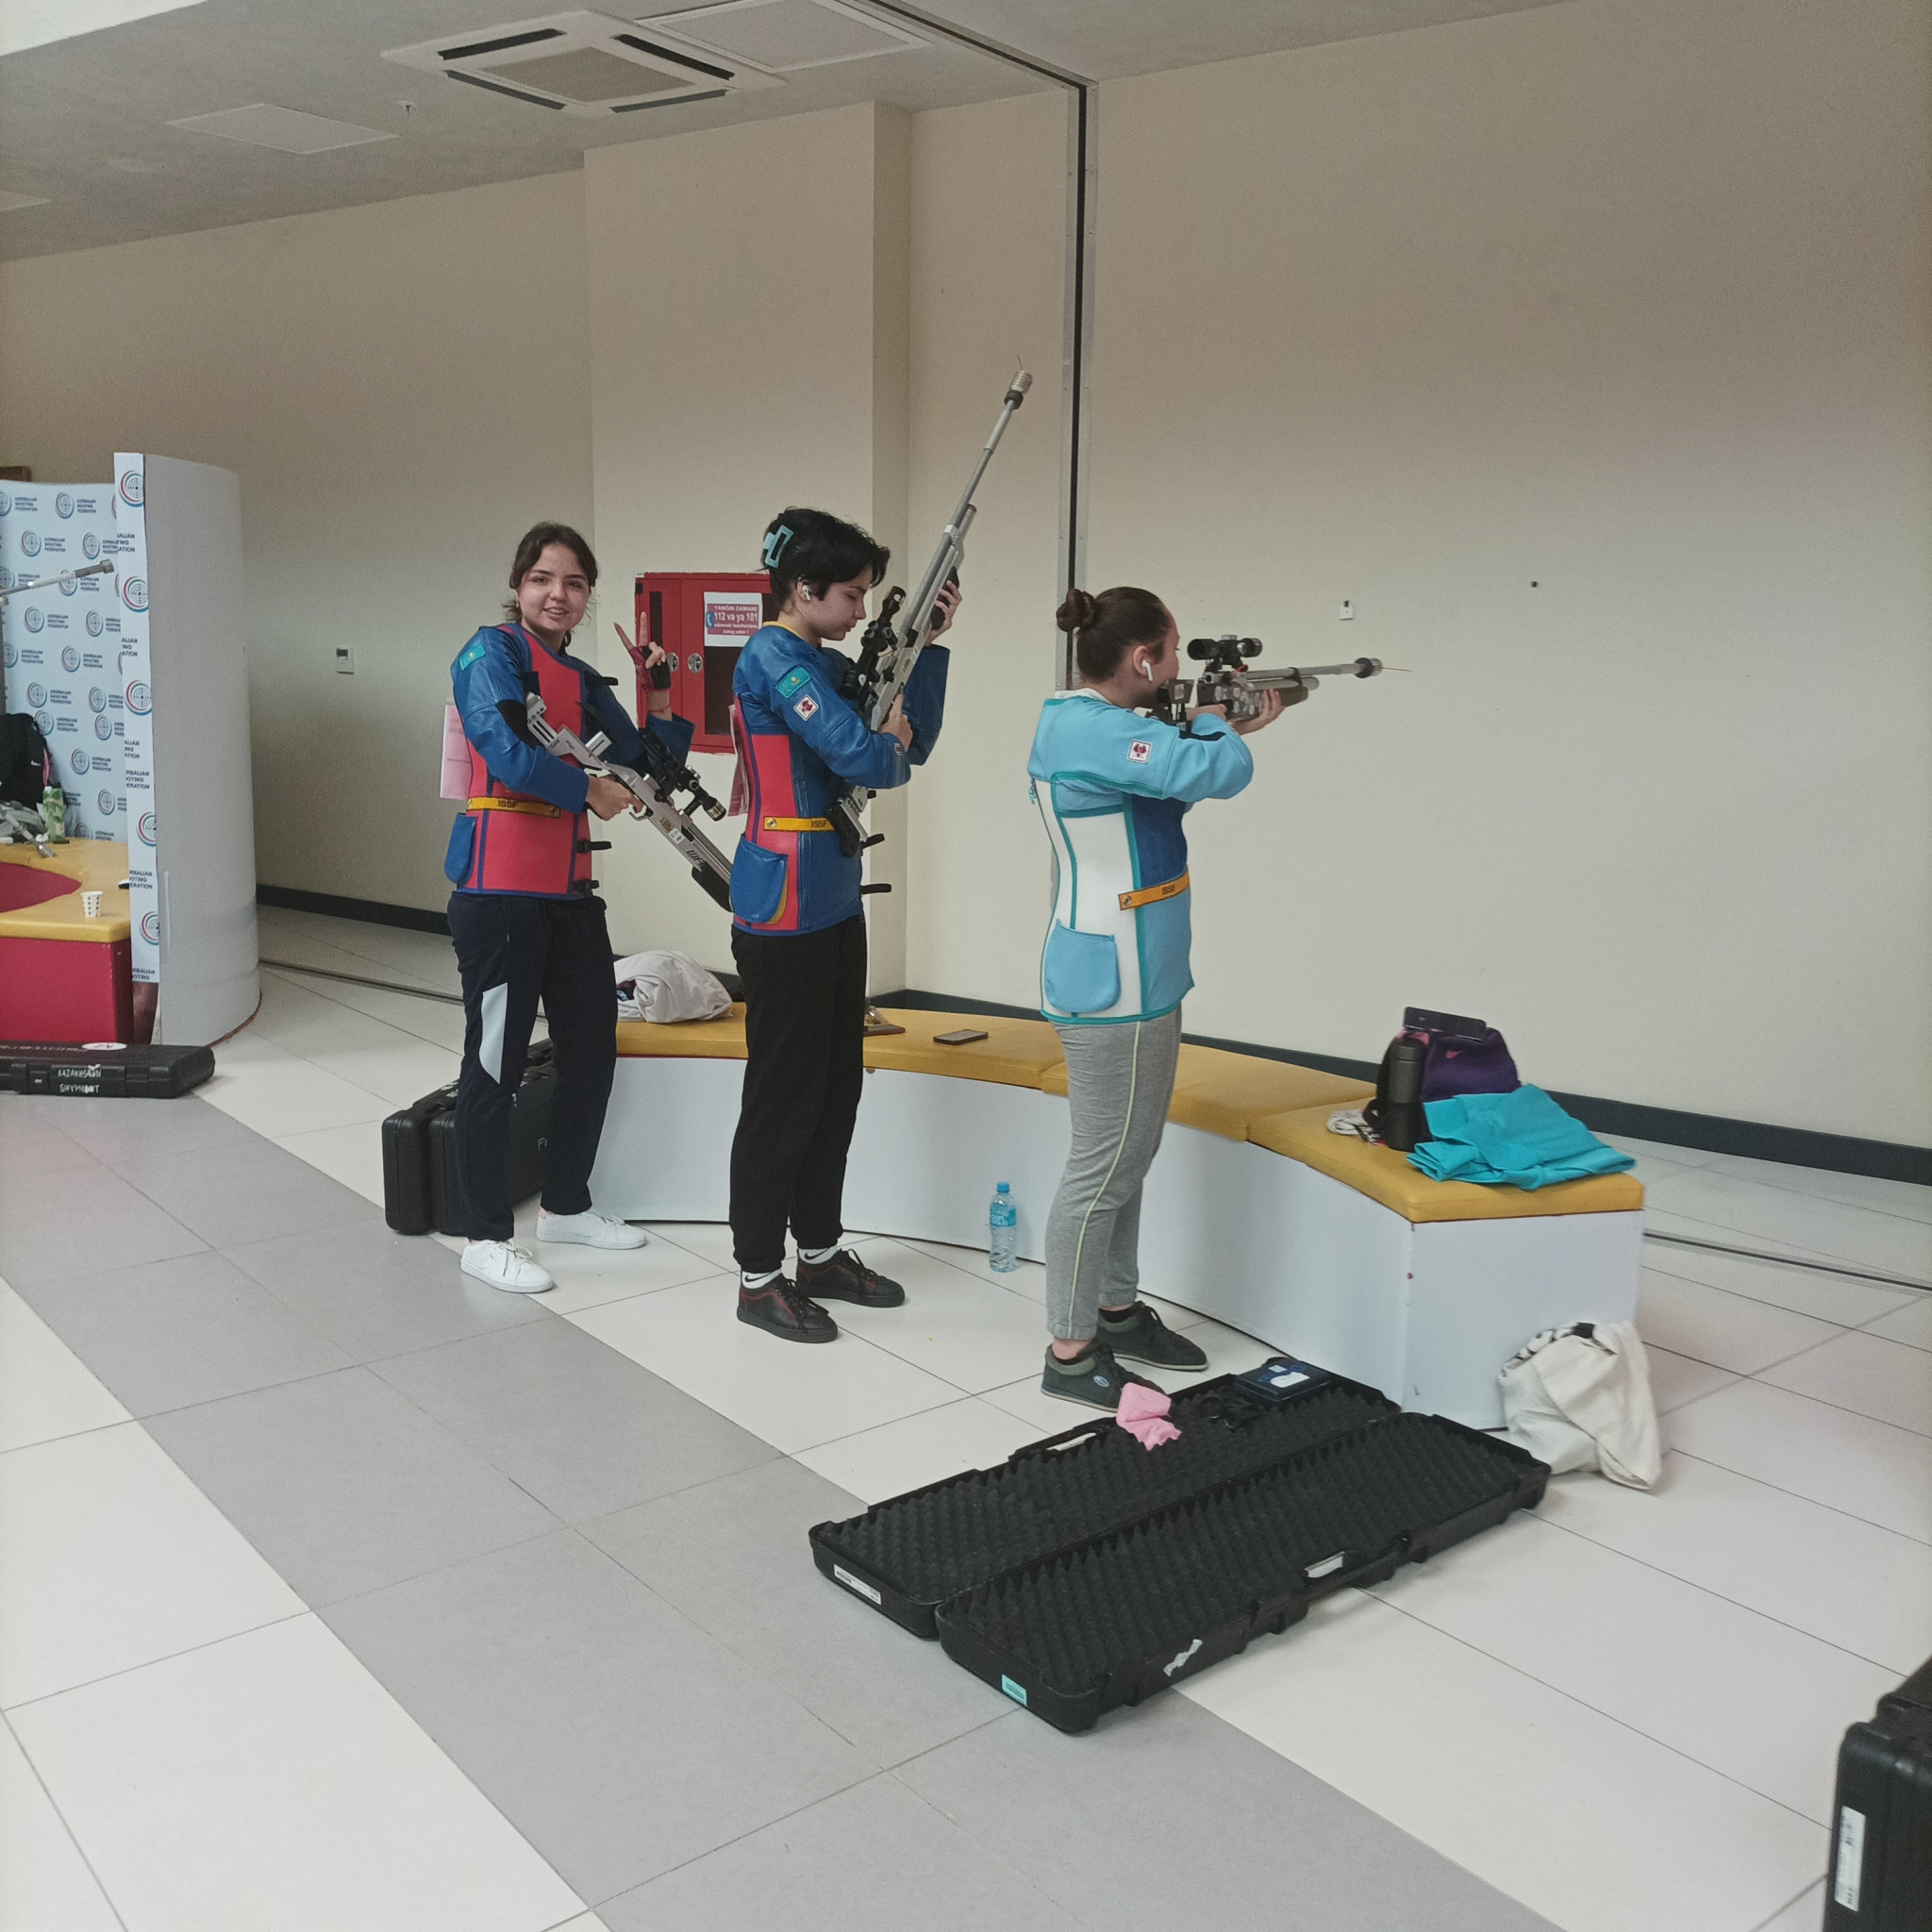 Areas of the Baku Shooting Centre are set aside for dry shooting so that competitors can hone their technique ©ITG 